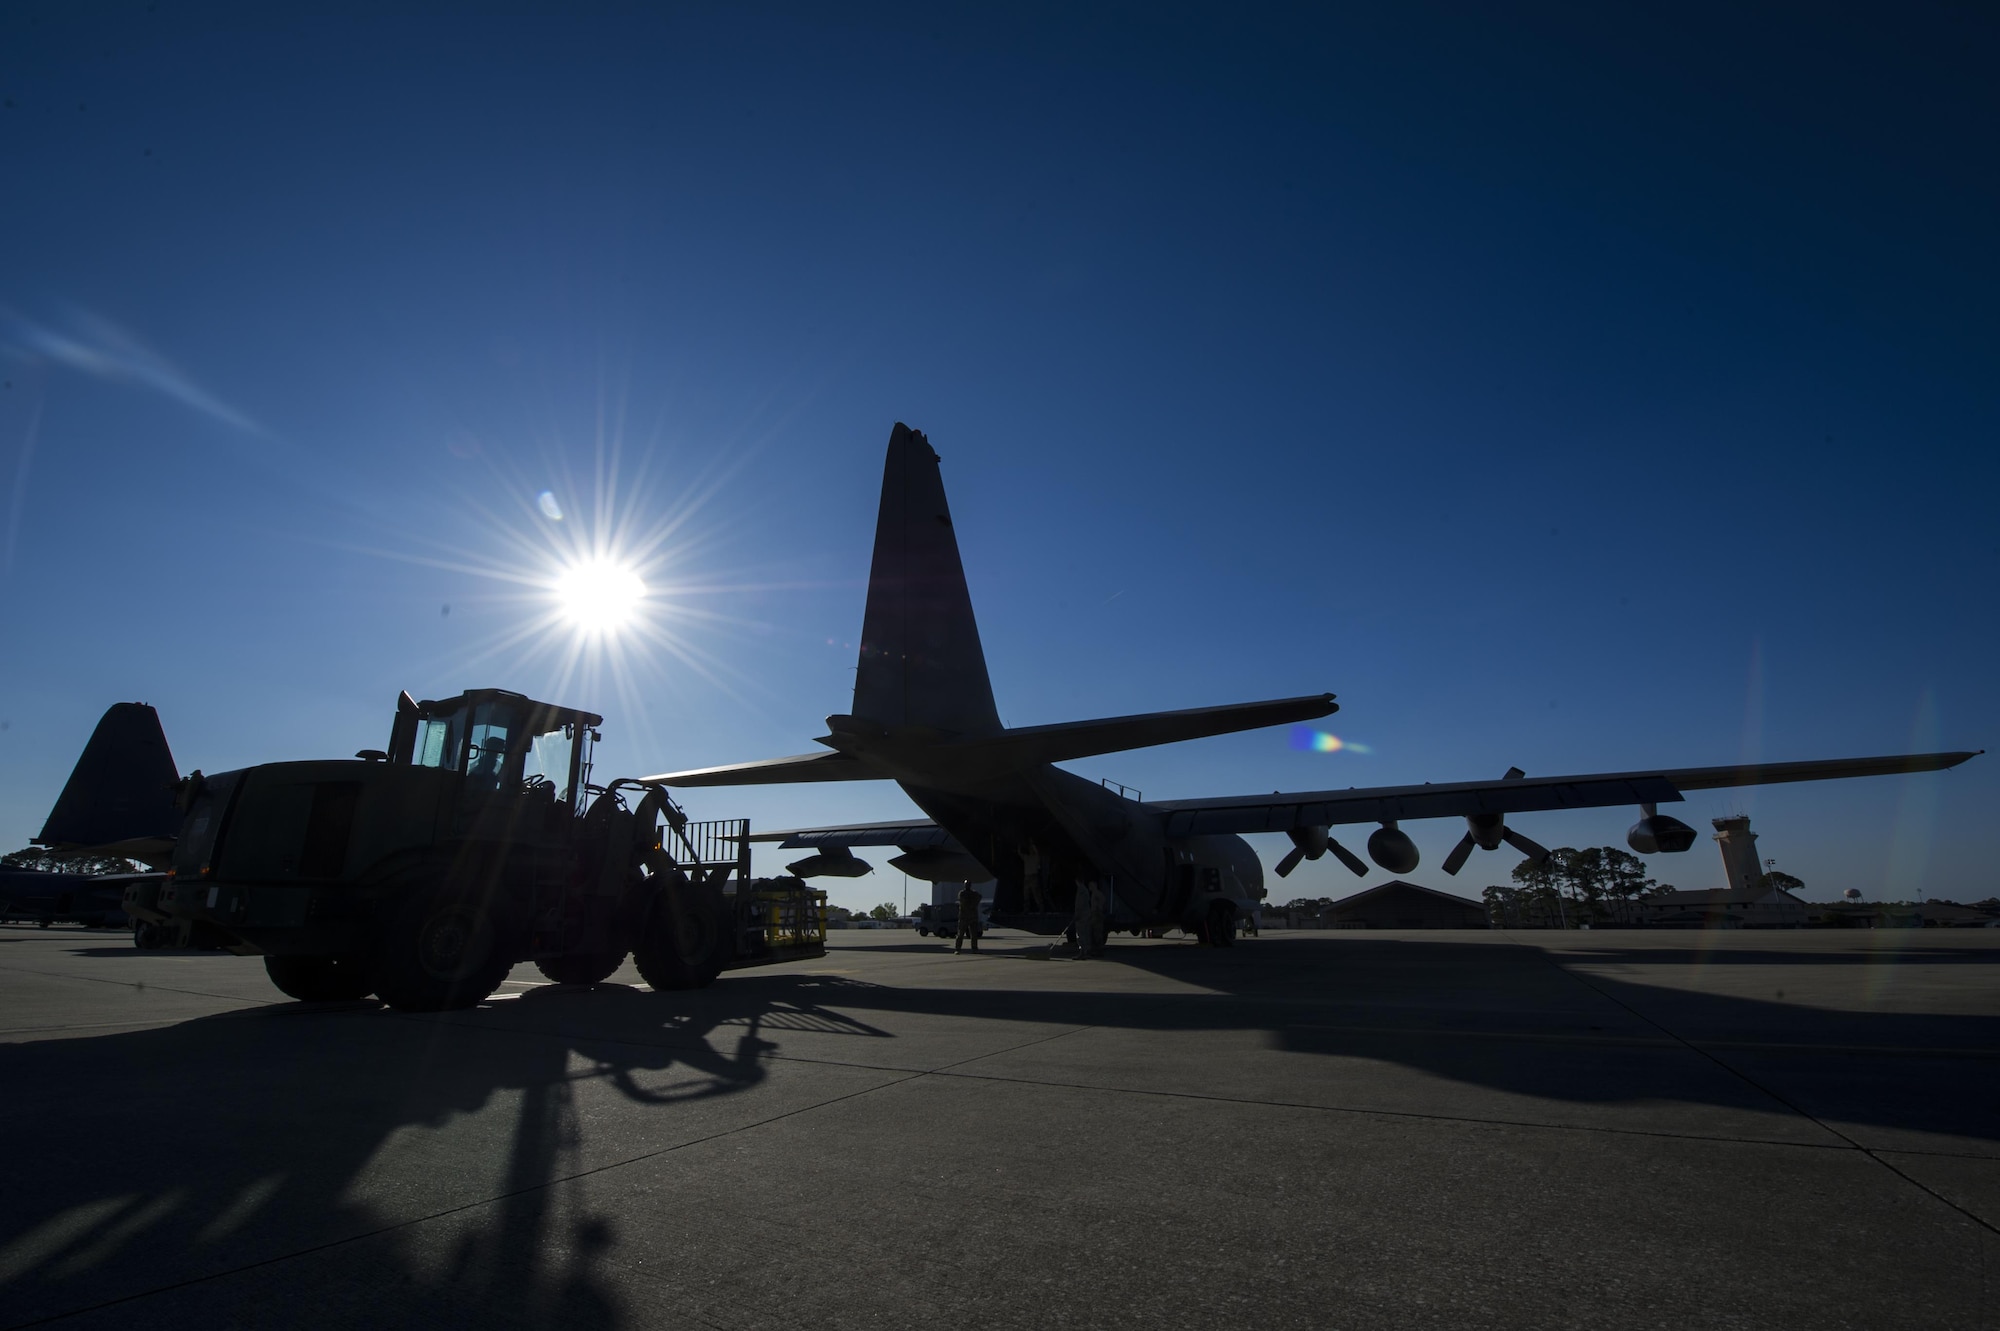 Air transportation specialists with the 1st Special Operations Logistics Readiness Squadron load pallets onto an MC-130 Combat Talon II at Hurlburt Field, Fla., April 7, 2017. The Combat Talon II provides infiltration, exfiltration, and resupply of special operations forces and equipment in hostile or denied territory. (U.S. Air Force photo by Airman 1st Class Joseph Pick)